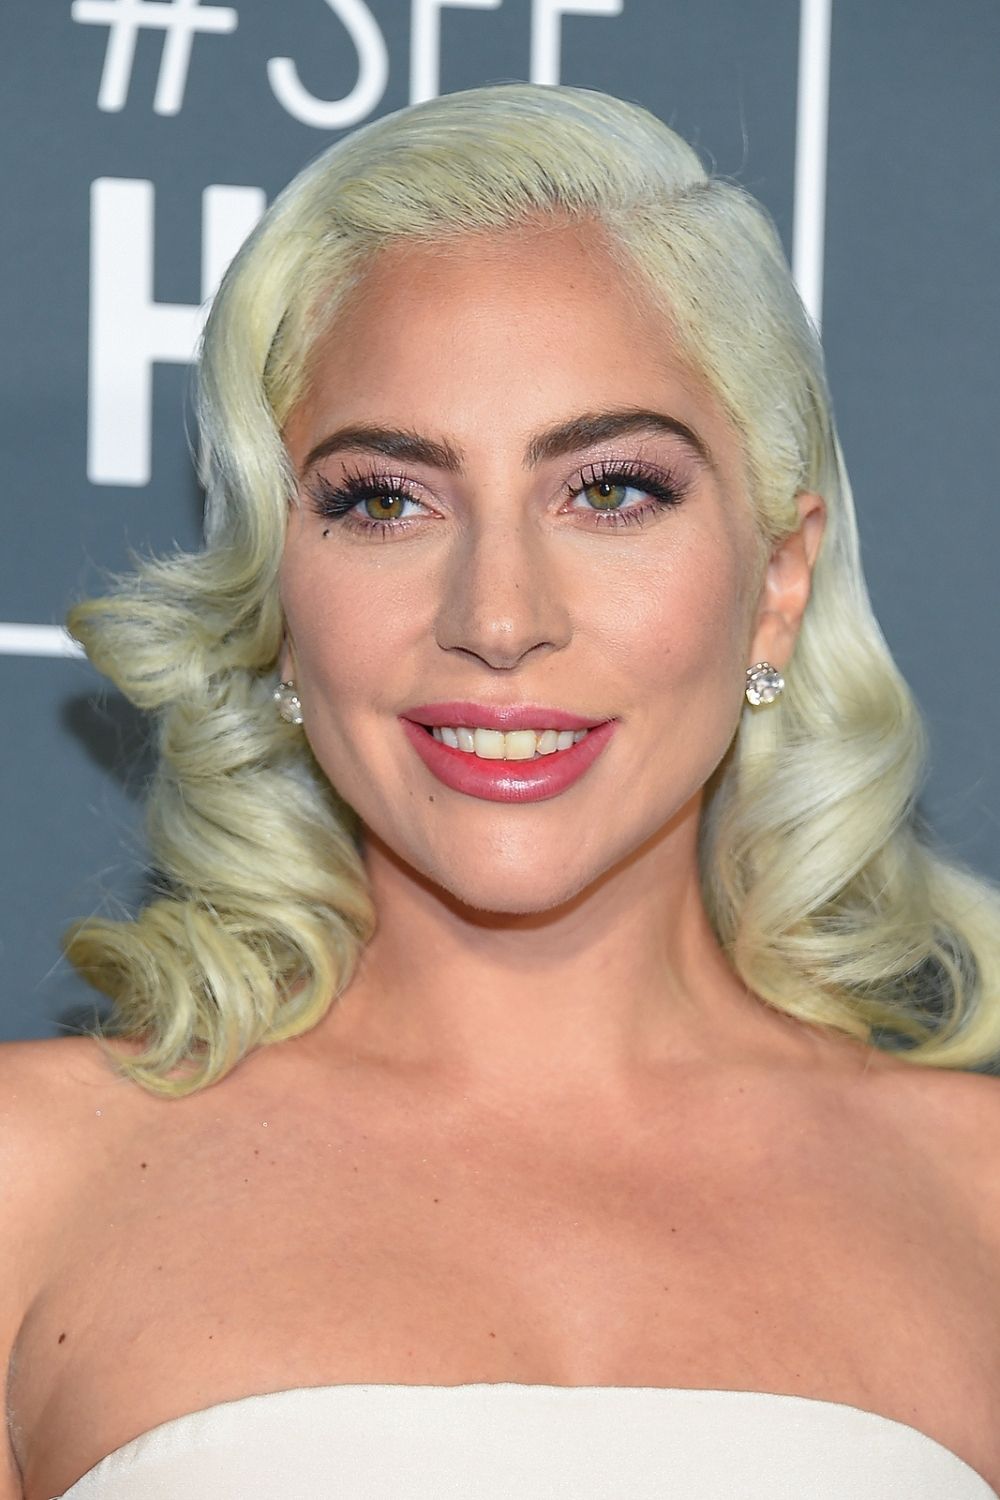 Lady Gagas Bio Height Weight Age Measurements Net Worth And More Celeb Volt